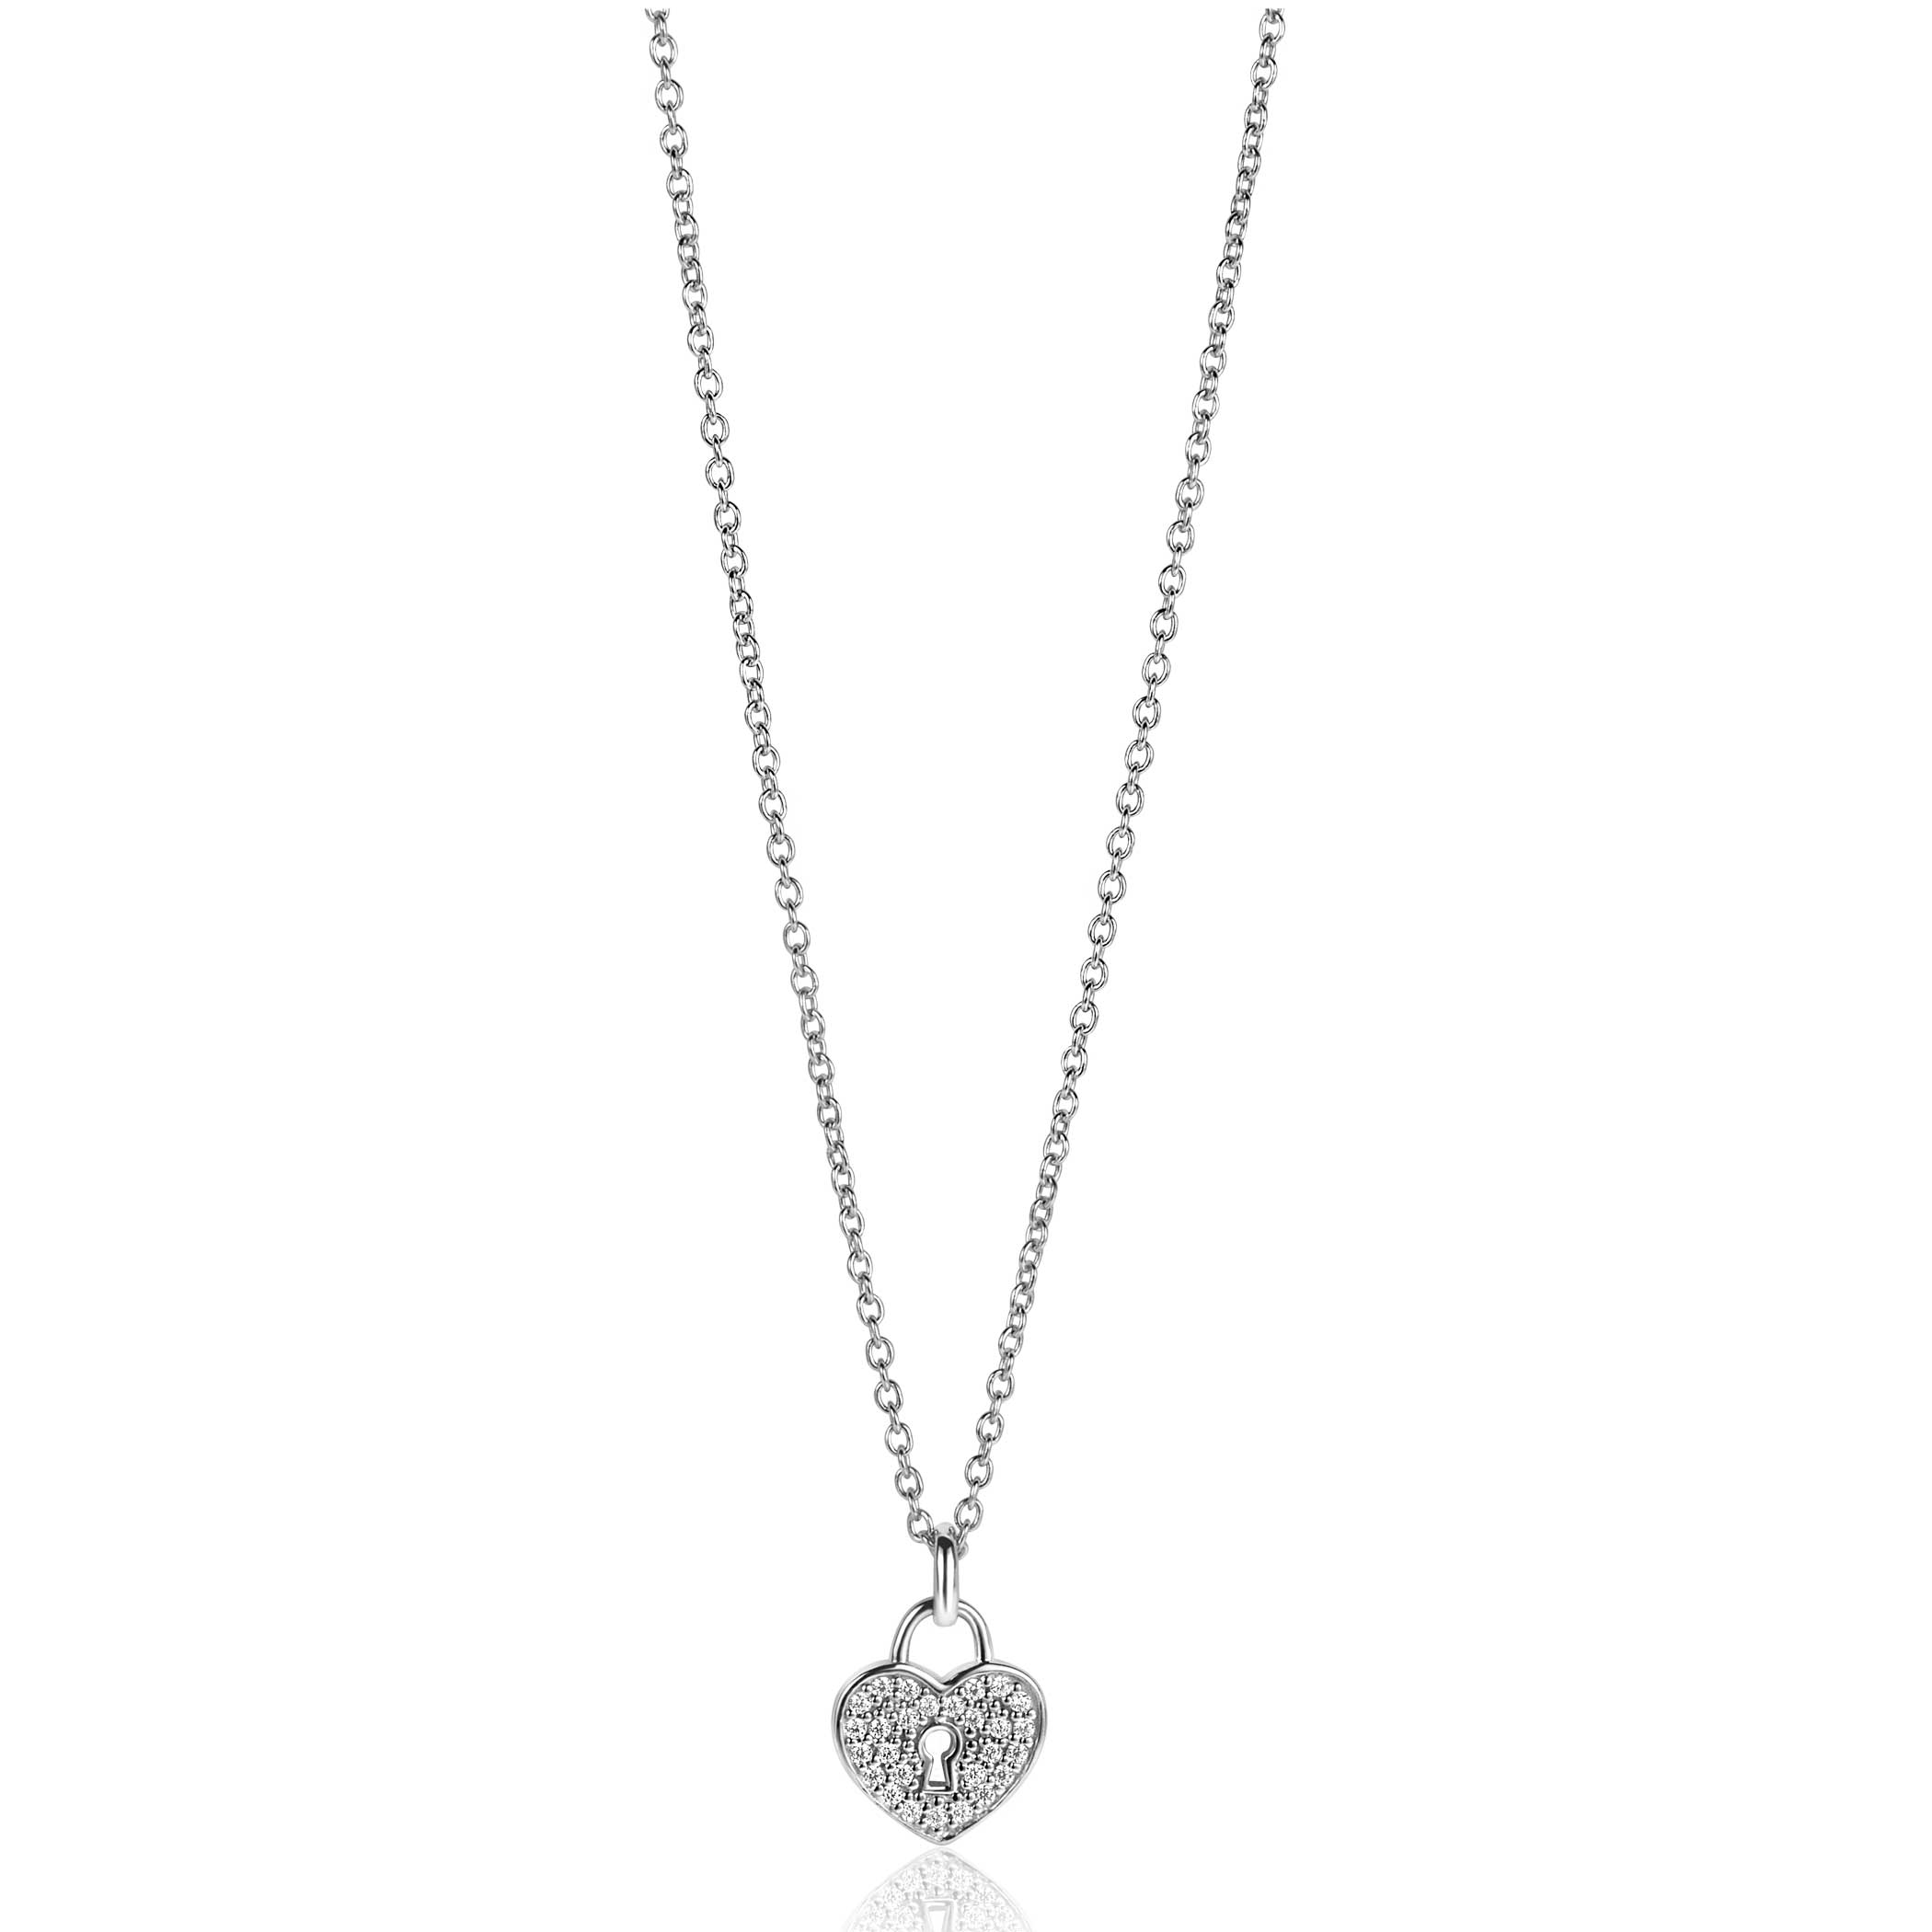 15mm ZINZI Sterling Silver Heart Pendant with Trendy Lock and White Zirconias ZIH2400 (excl. necklace)